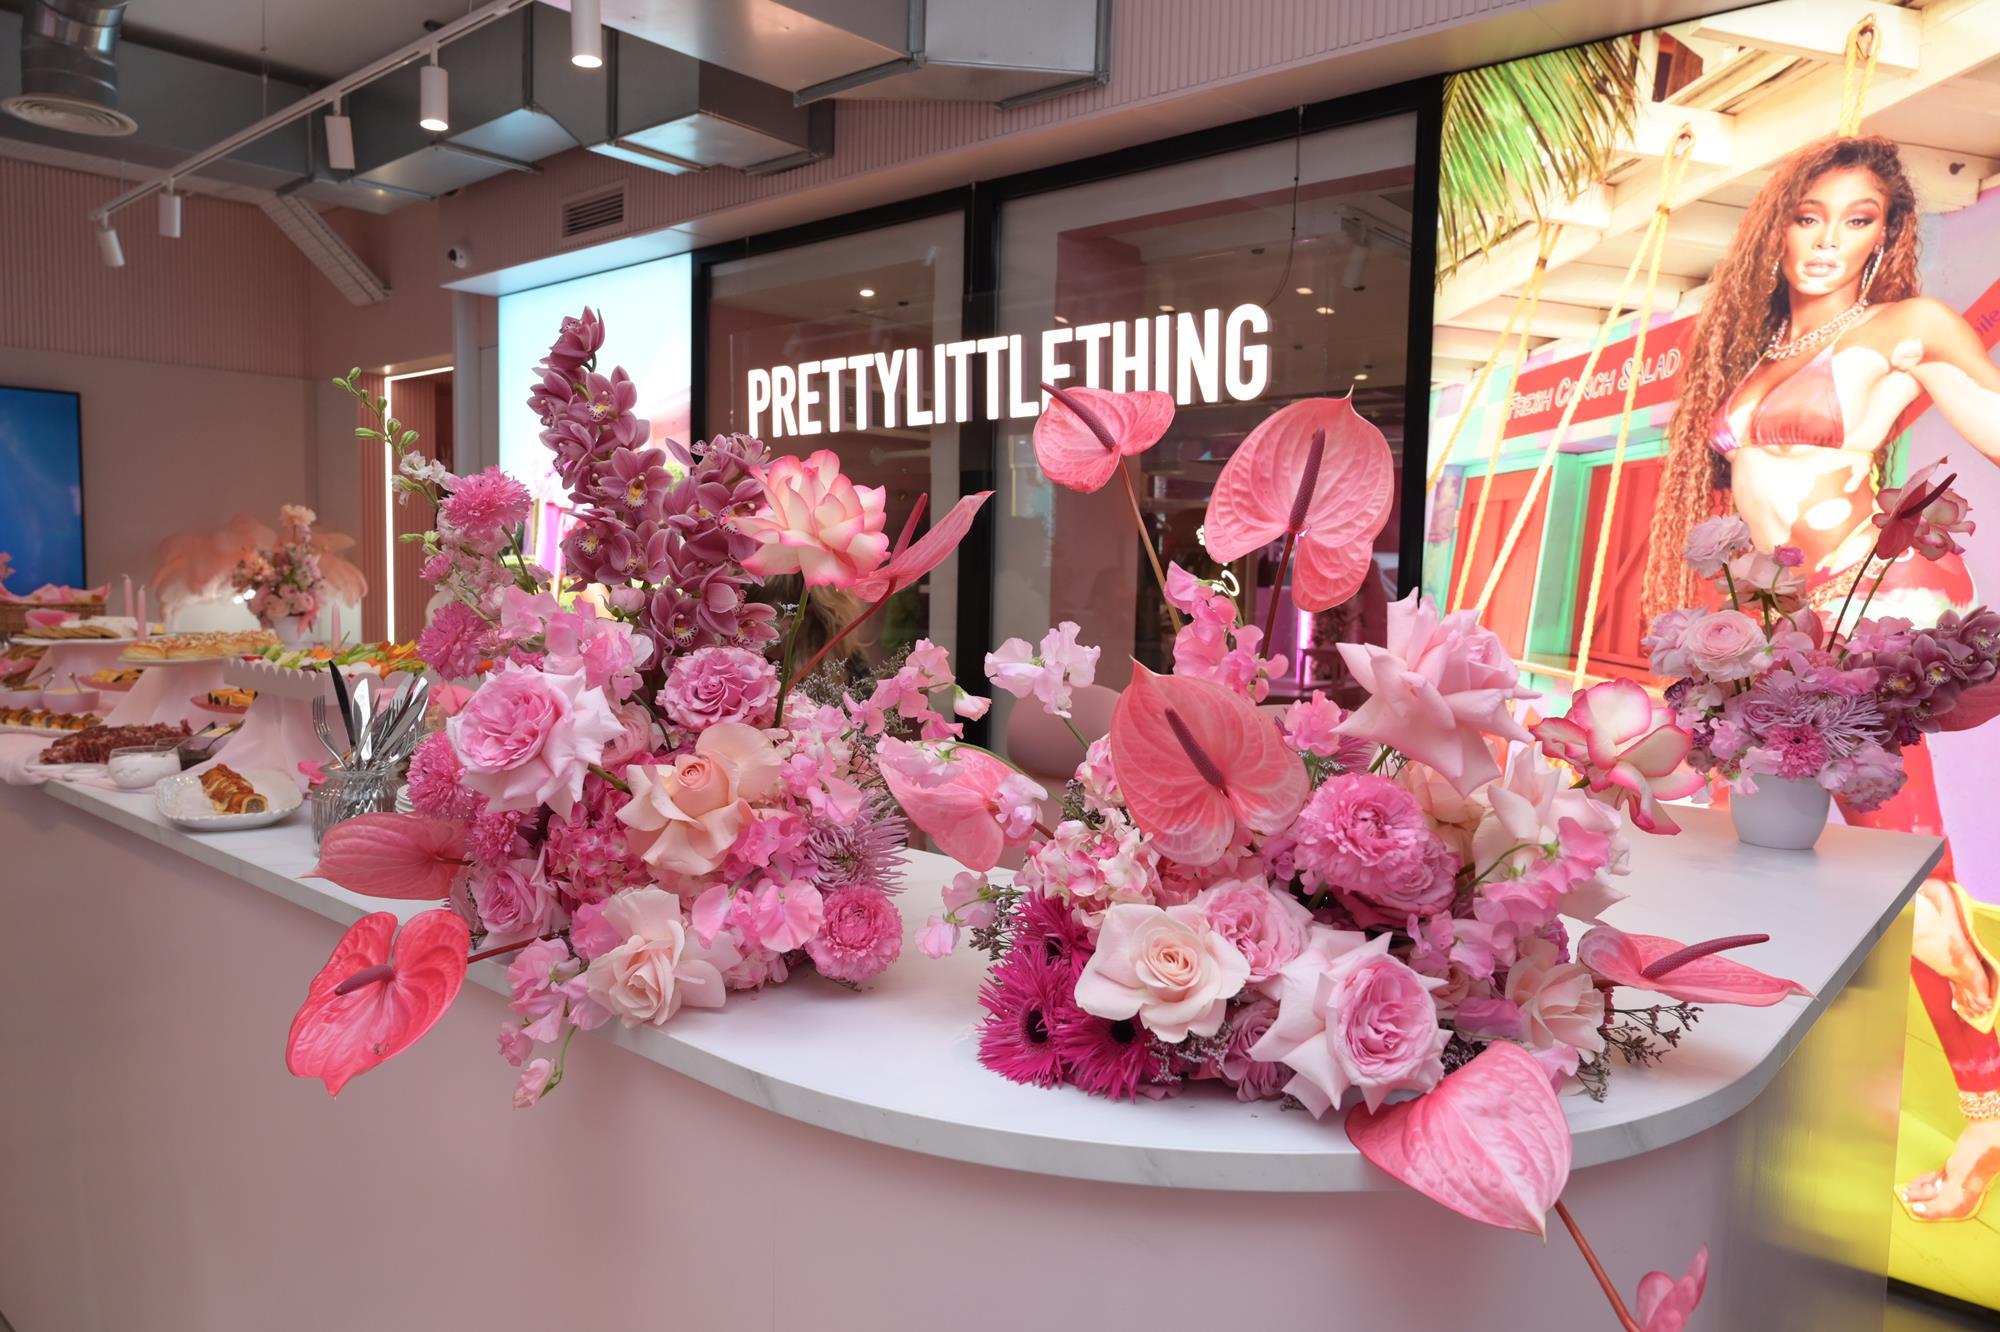 Store gallery: Inside PrettyLittleThing's new 'pink haven' showroom, Gallery